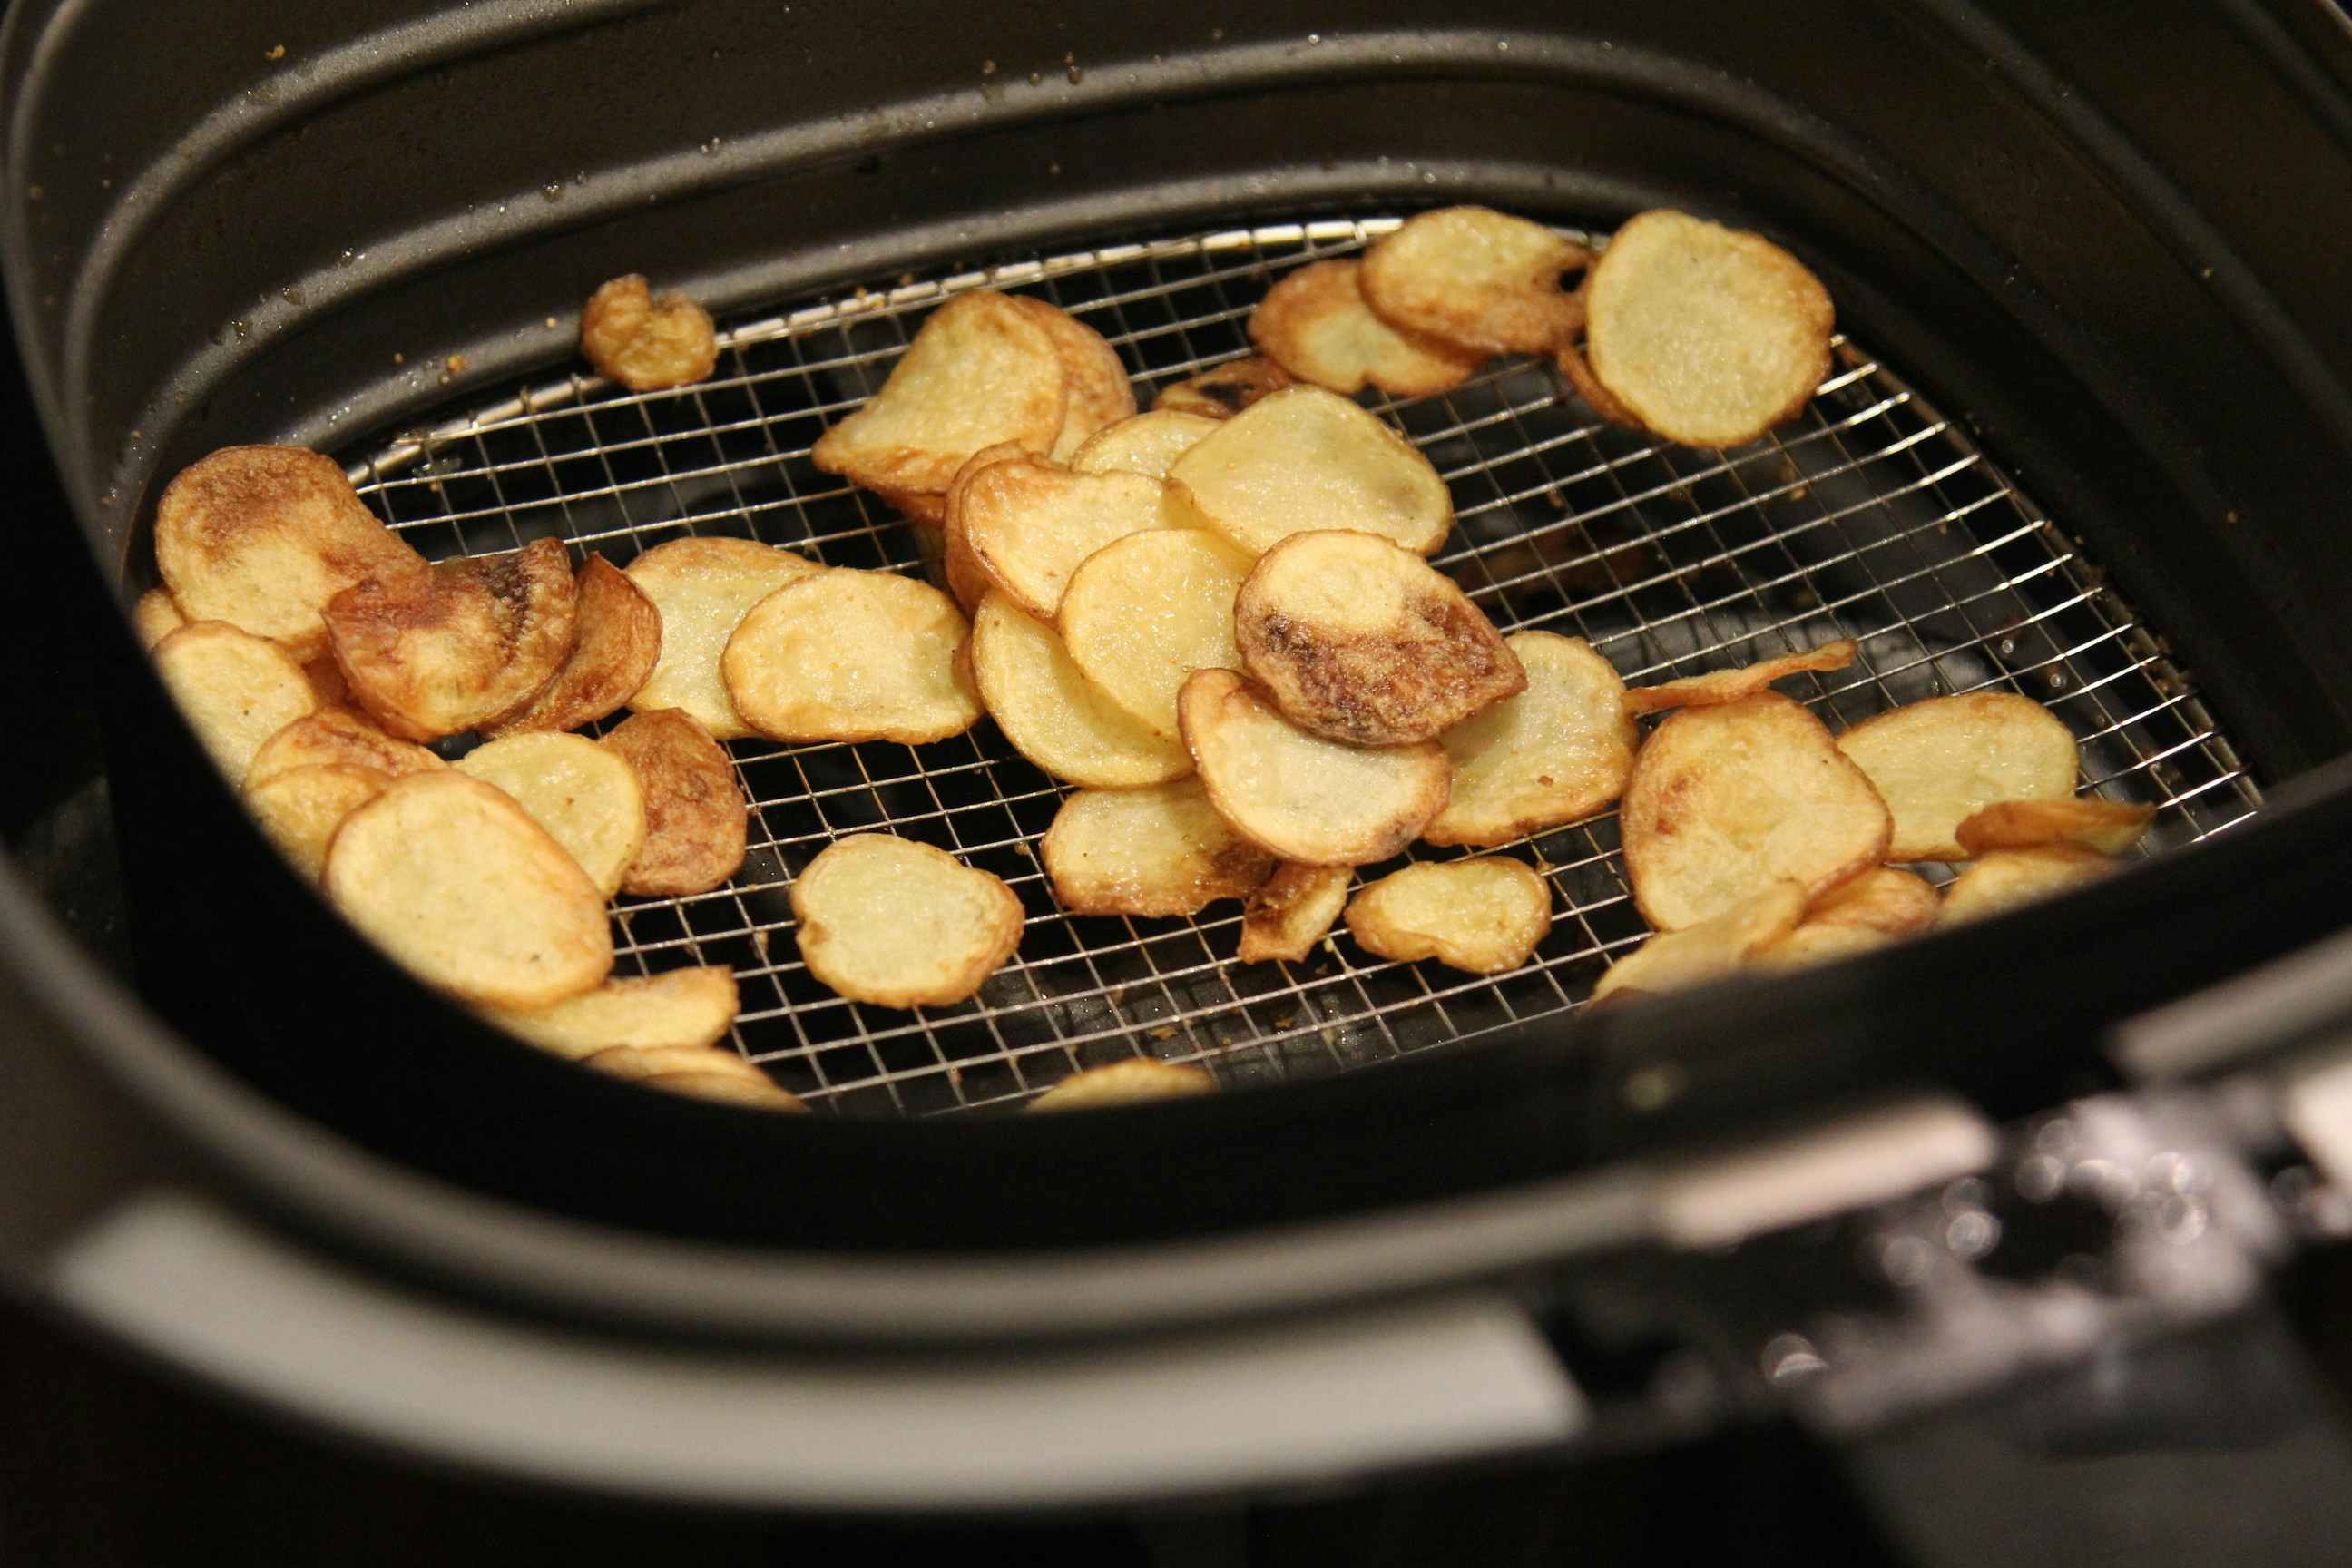 slices of crunchy potato chips in an air fryer